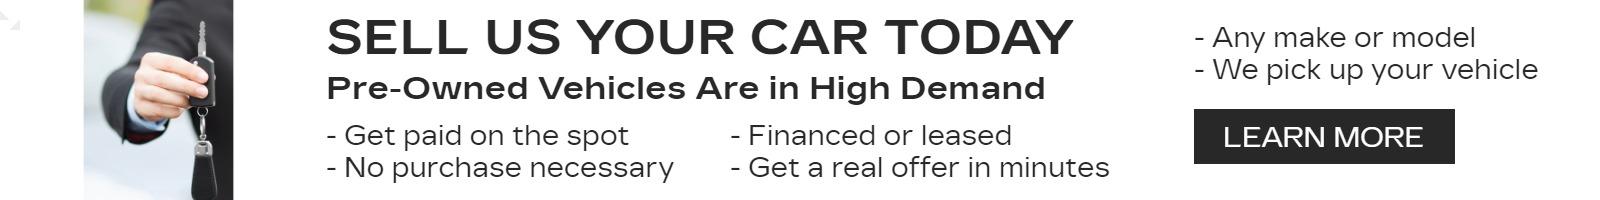 Pre-Owned Vehicles Are in High Demand
- Get paid on the spot
- No purchase necessary
- Financed or leased
- Get a real offer in minutes
- Any make or model
- We pick up your vehicle